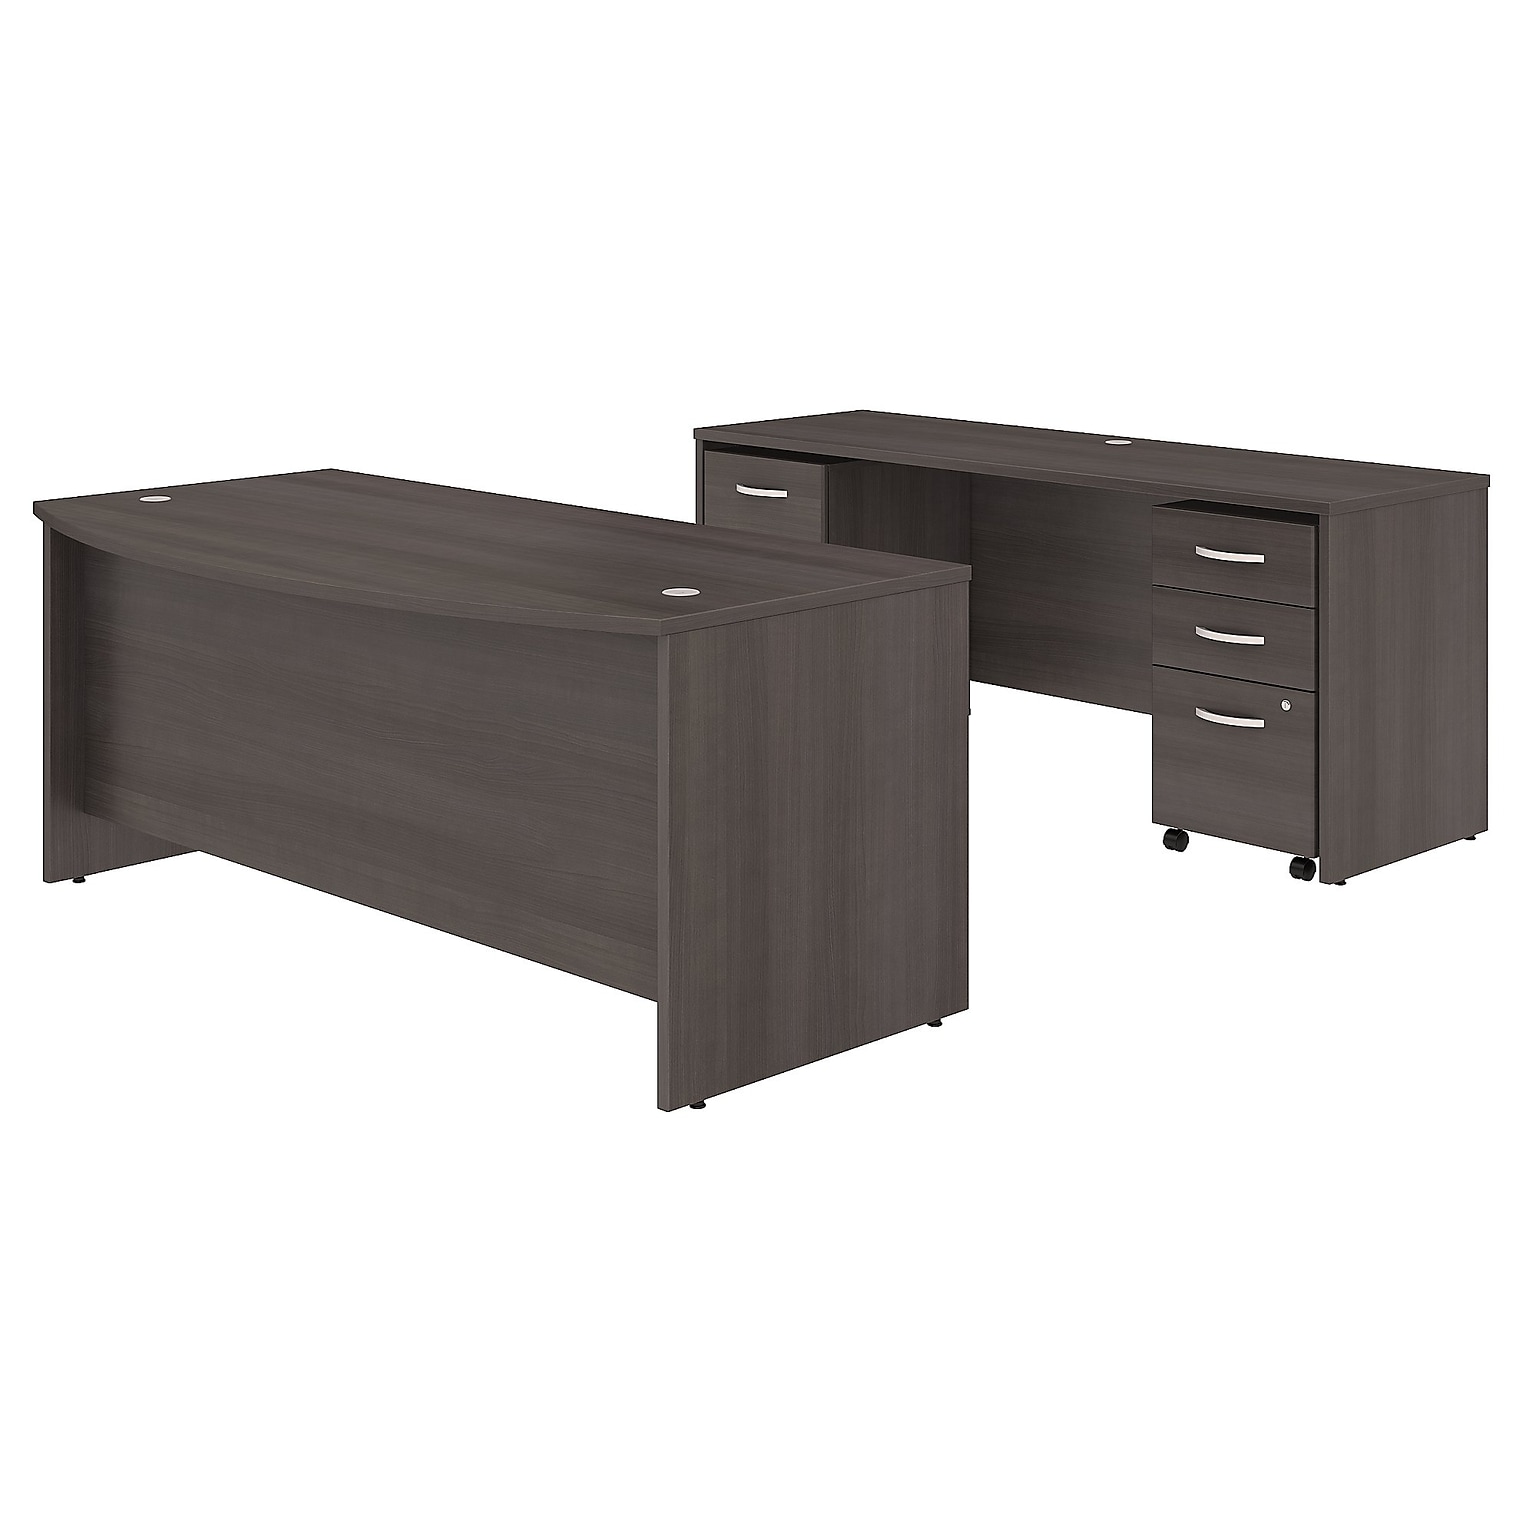 Bush Business Furniture Studio C 72W Bow Front Desk and Credenza with Mobile File Cabinets, Storm Gray (STC009SG)